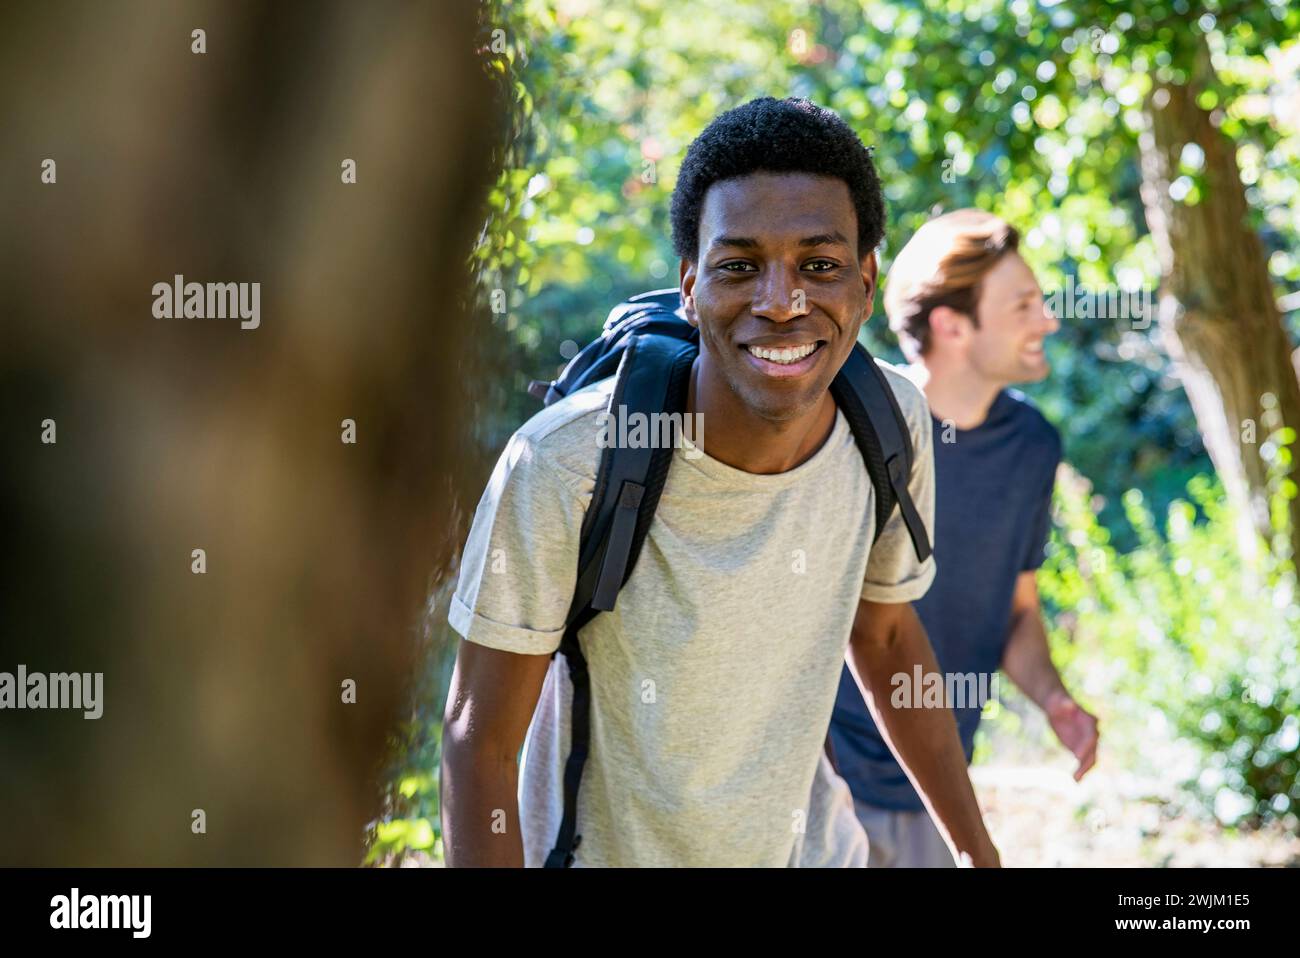 Young adult man wearing backpack looking at the camera during hiking with friends Stock Photo